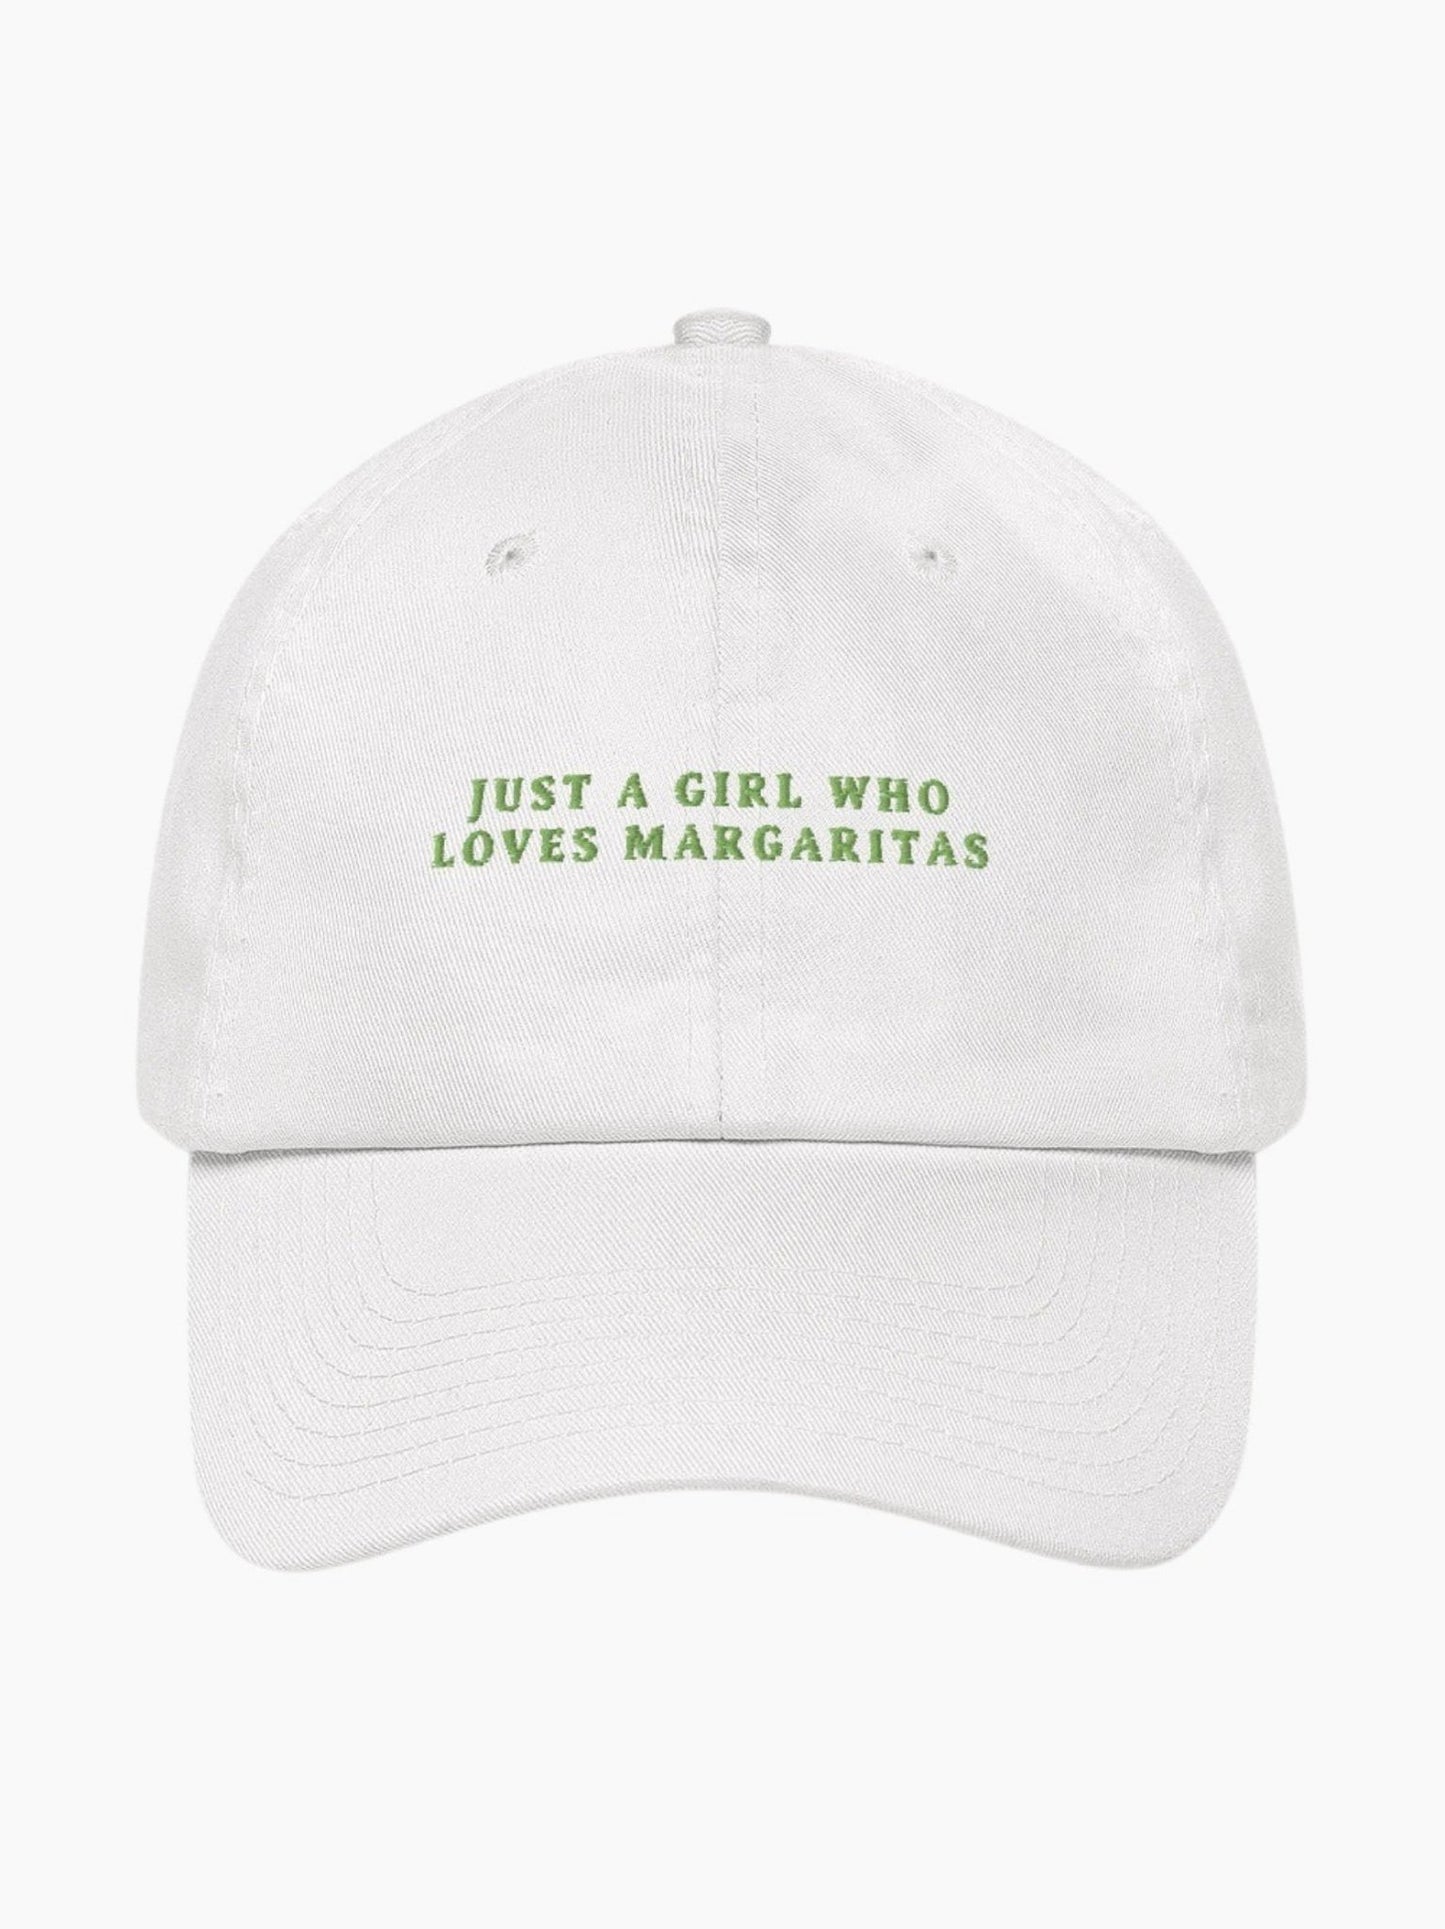 Just A Girl Who Loves Margaritas Cap